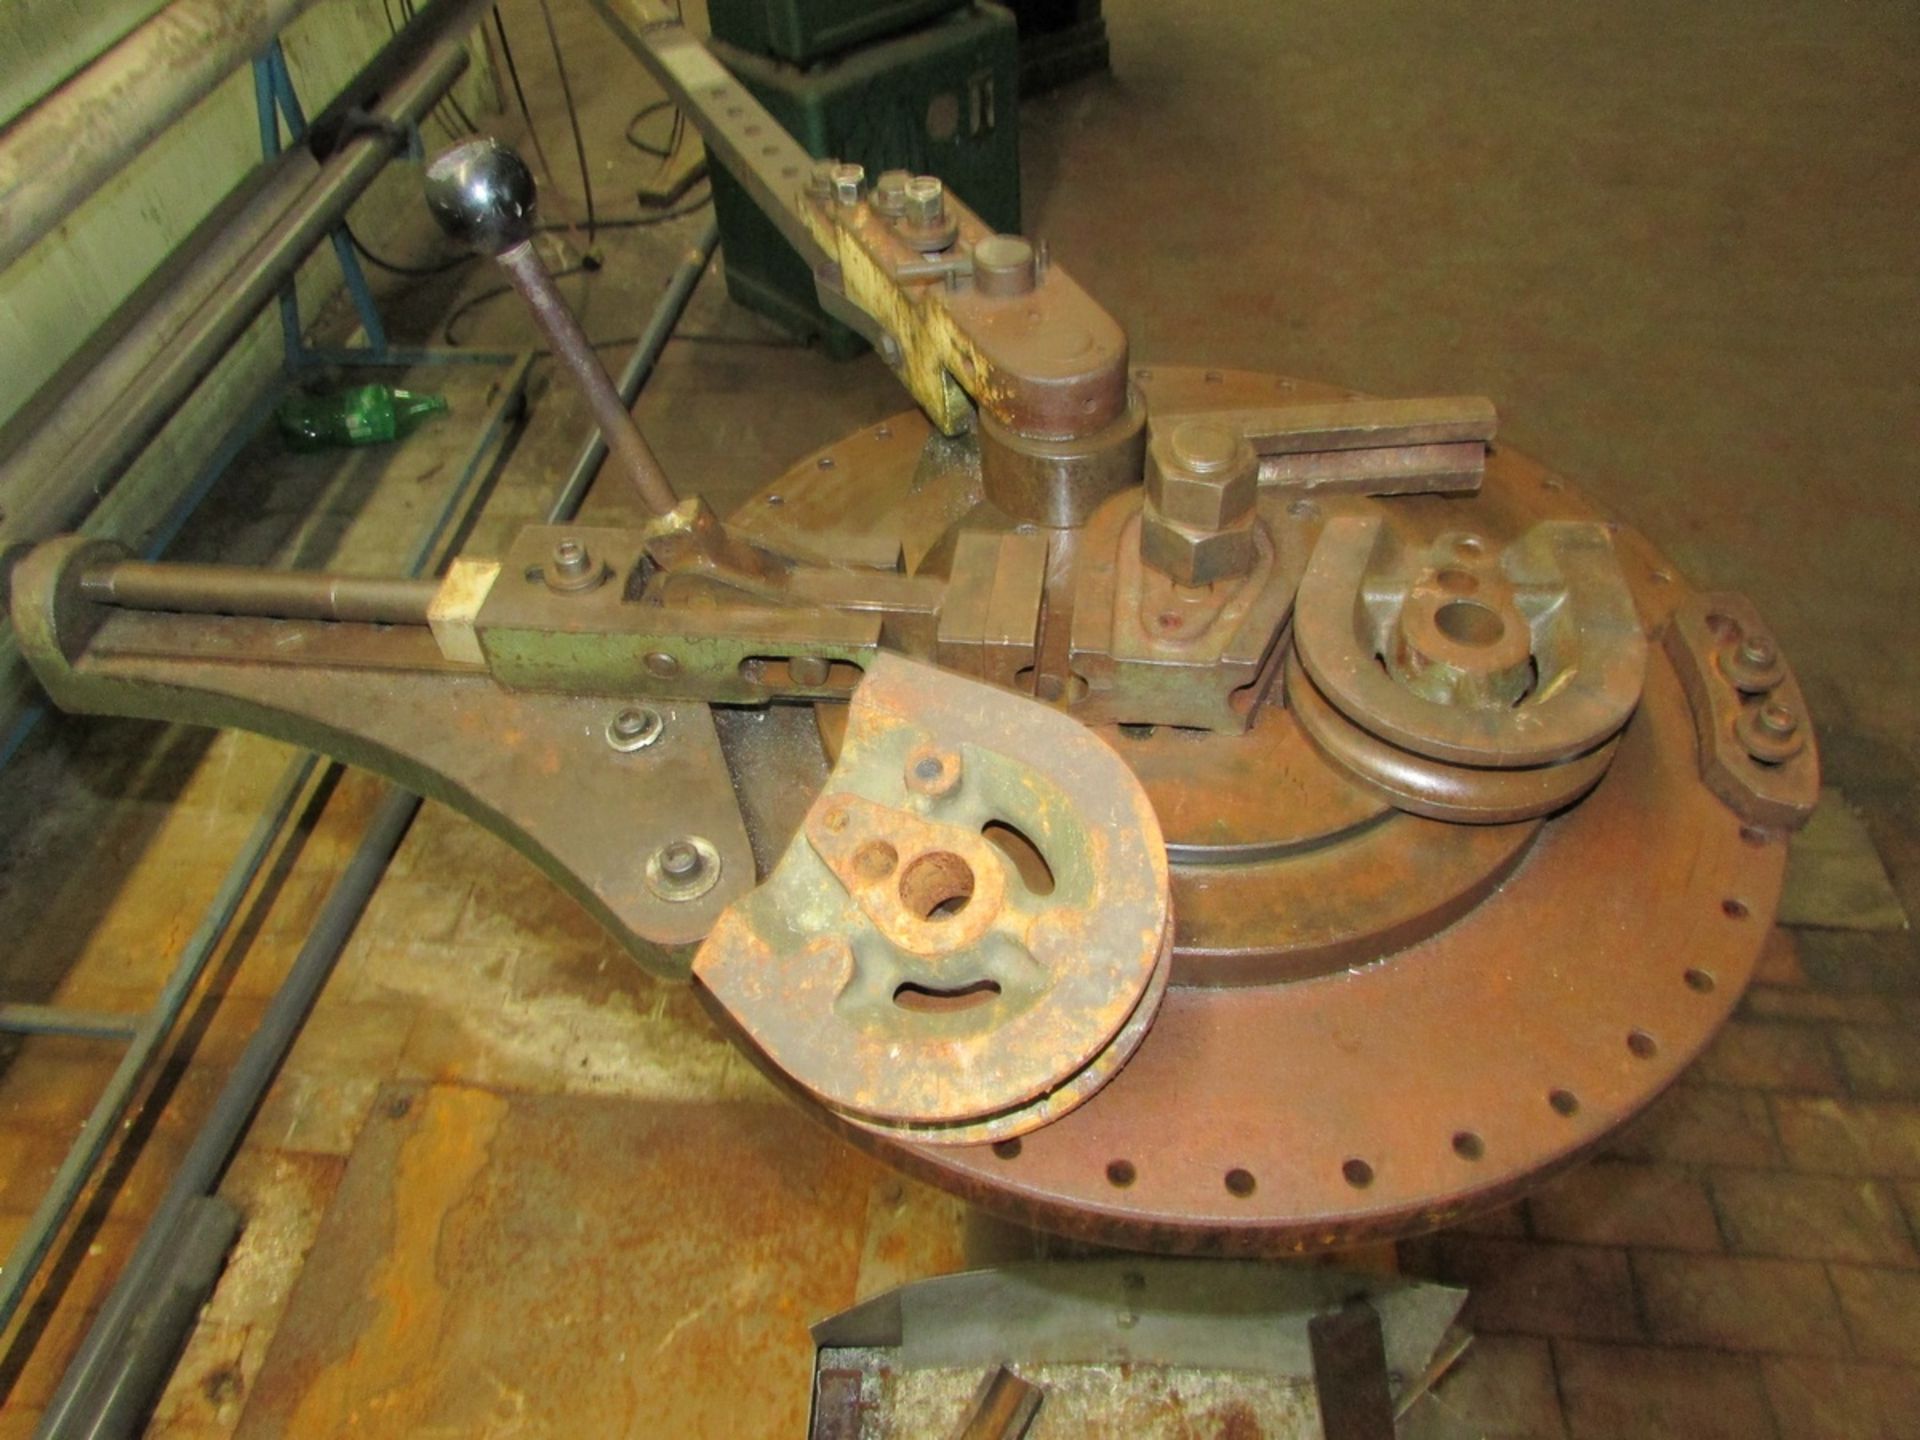 Di-Acro Manual Pipe Bender, with 1-3/4R 5/8G, 2-1/2R 7/8G, and 3R 1-1/8G Bending Dies - Image 3 of 4